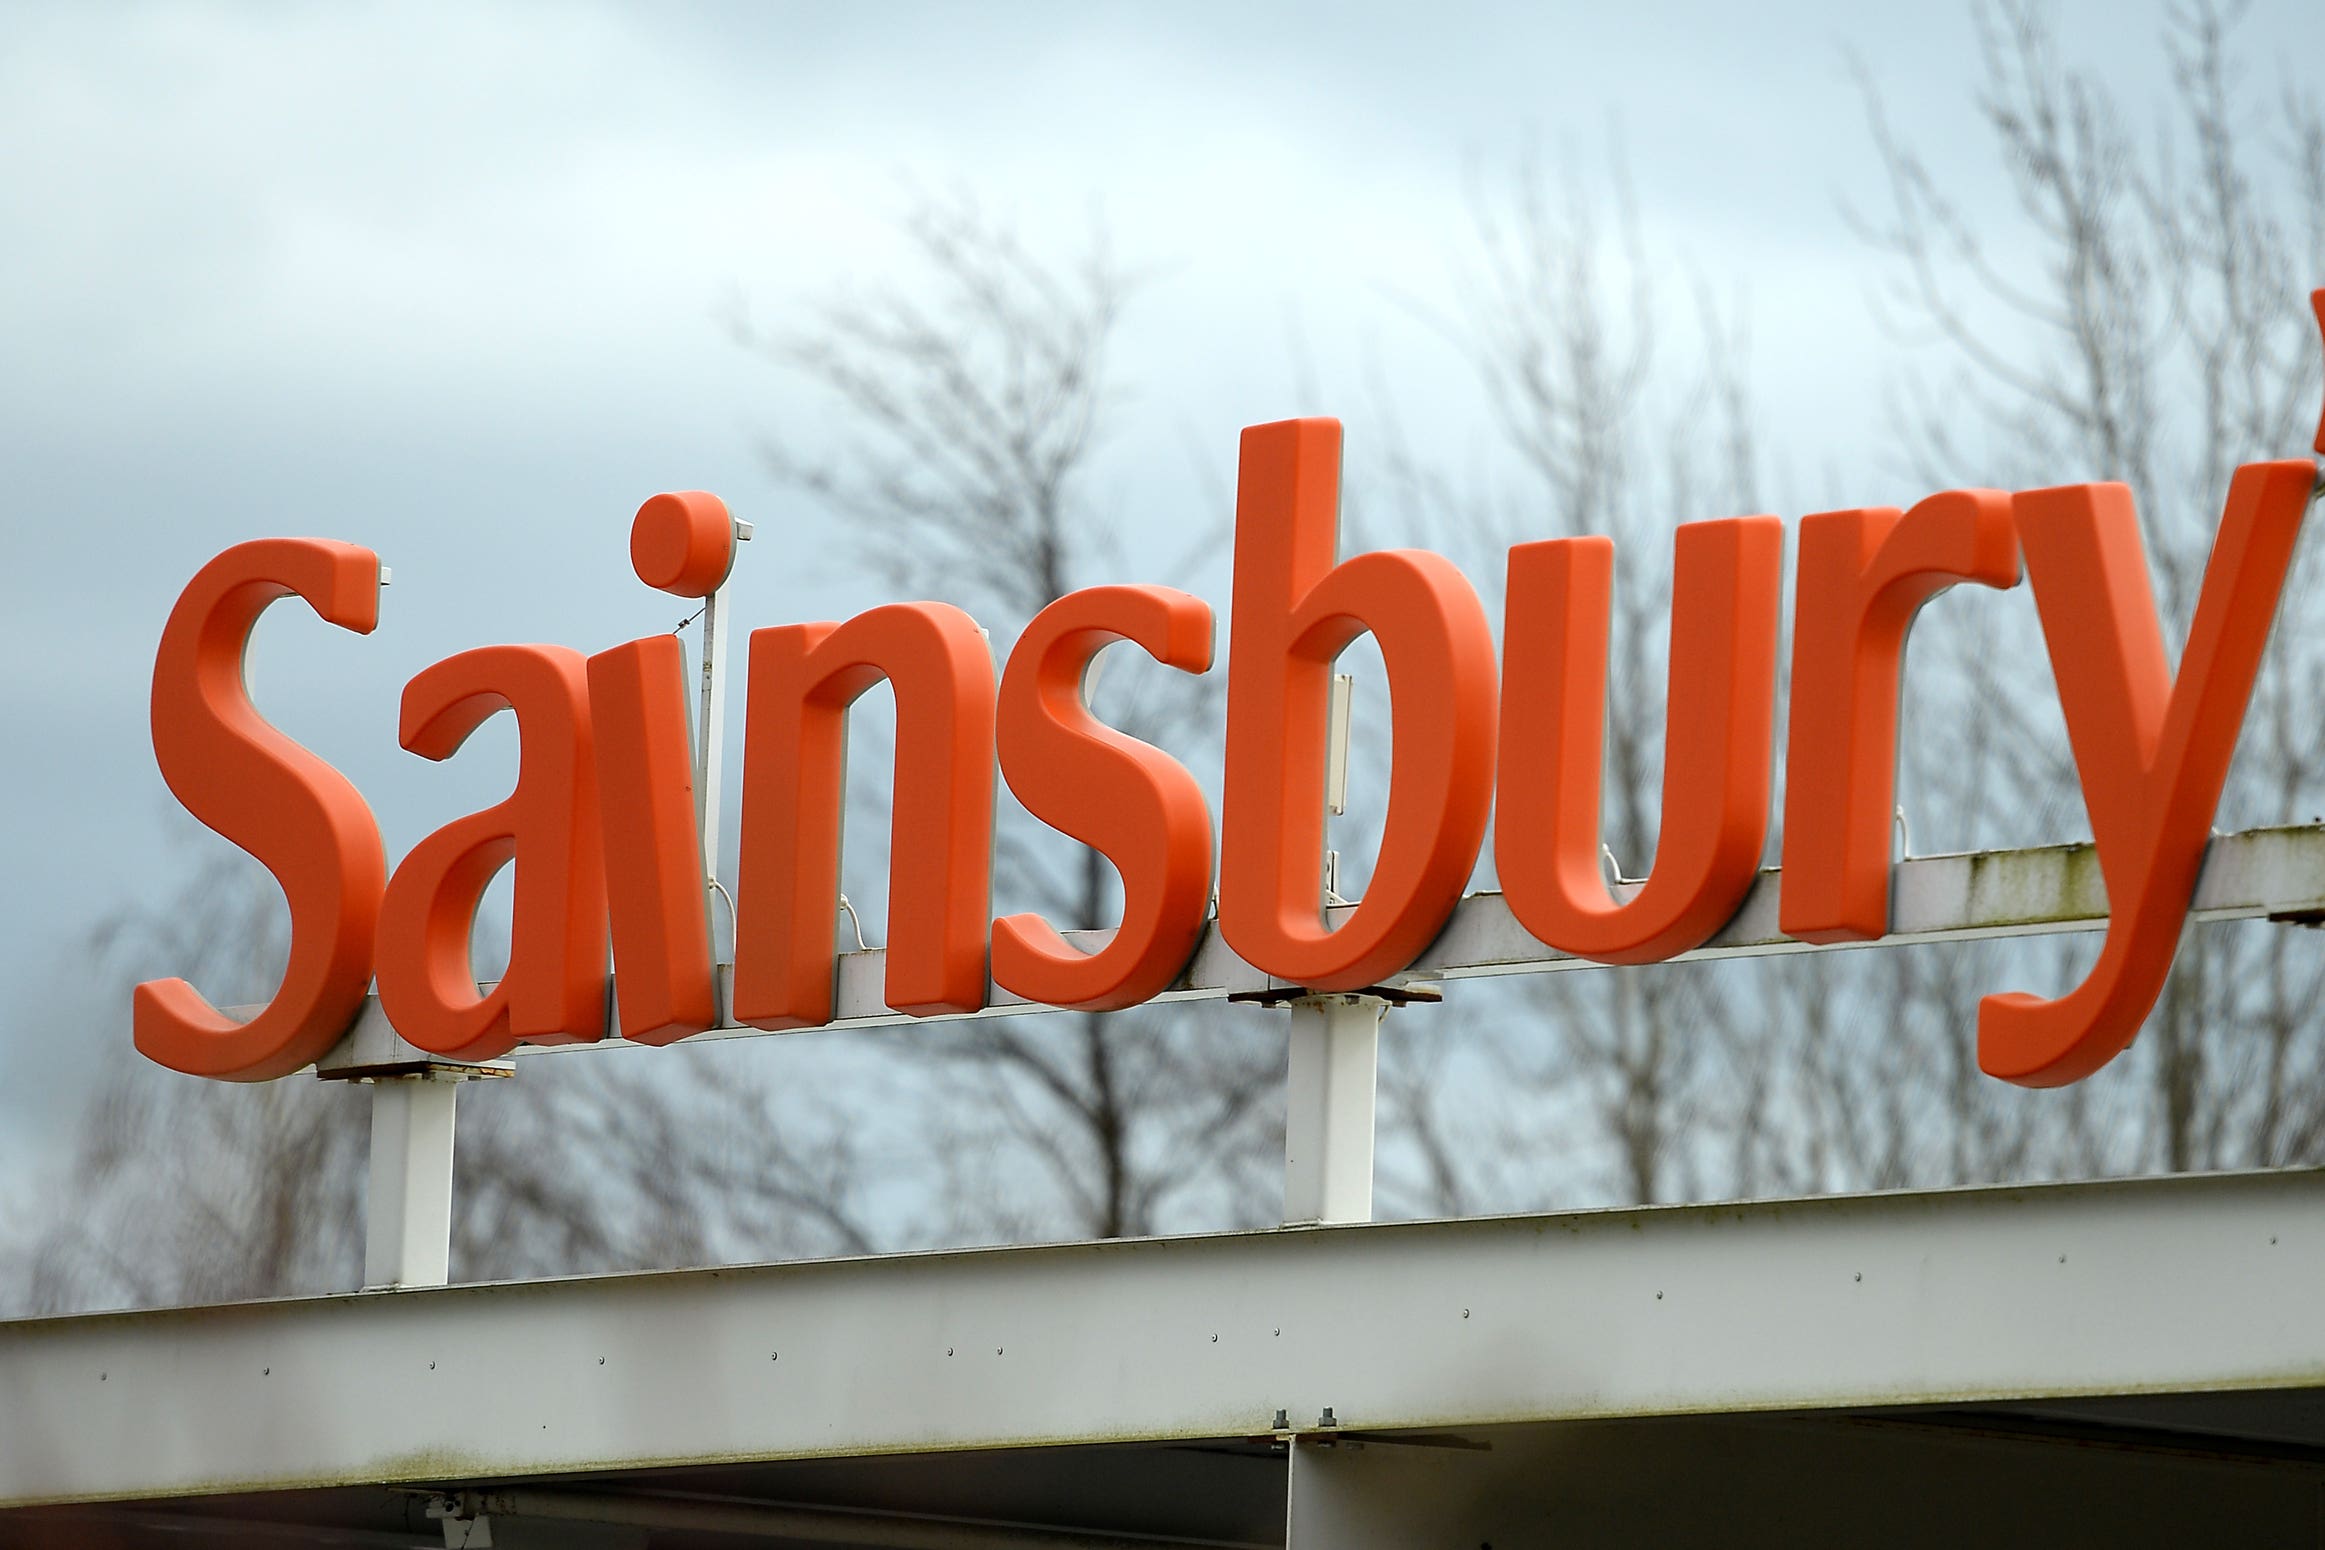 Sainsbury’s recorded a profit of £277 million in the last financial year (Andrew Matthews/PA)